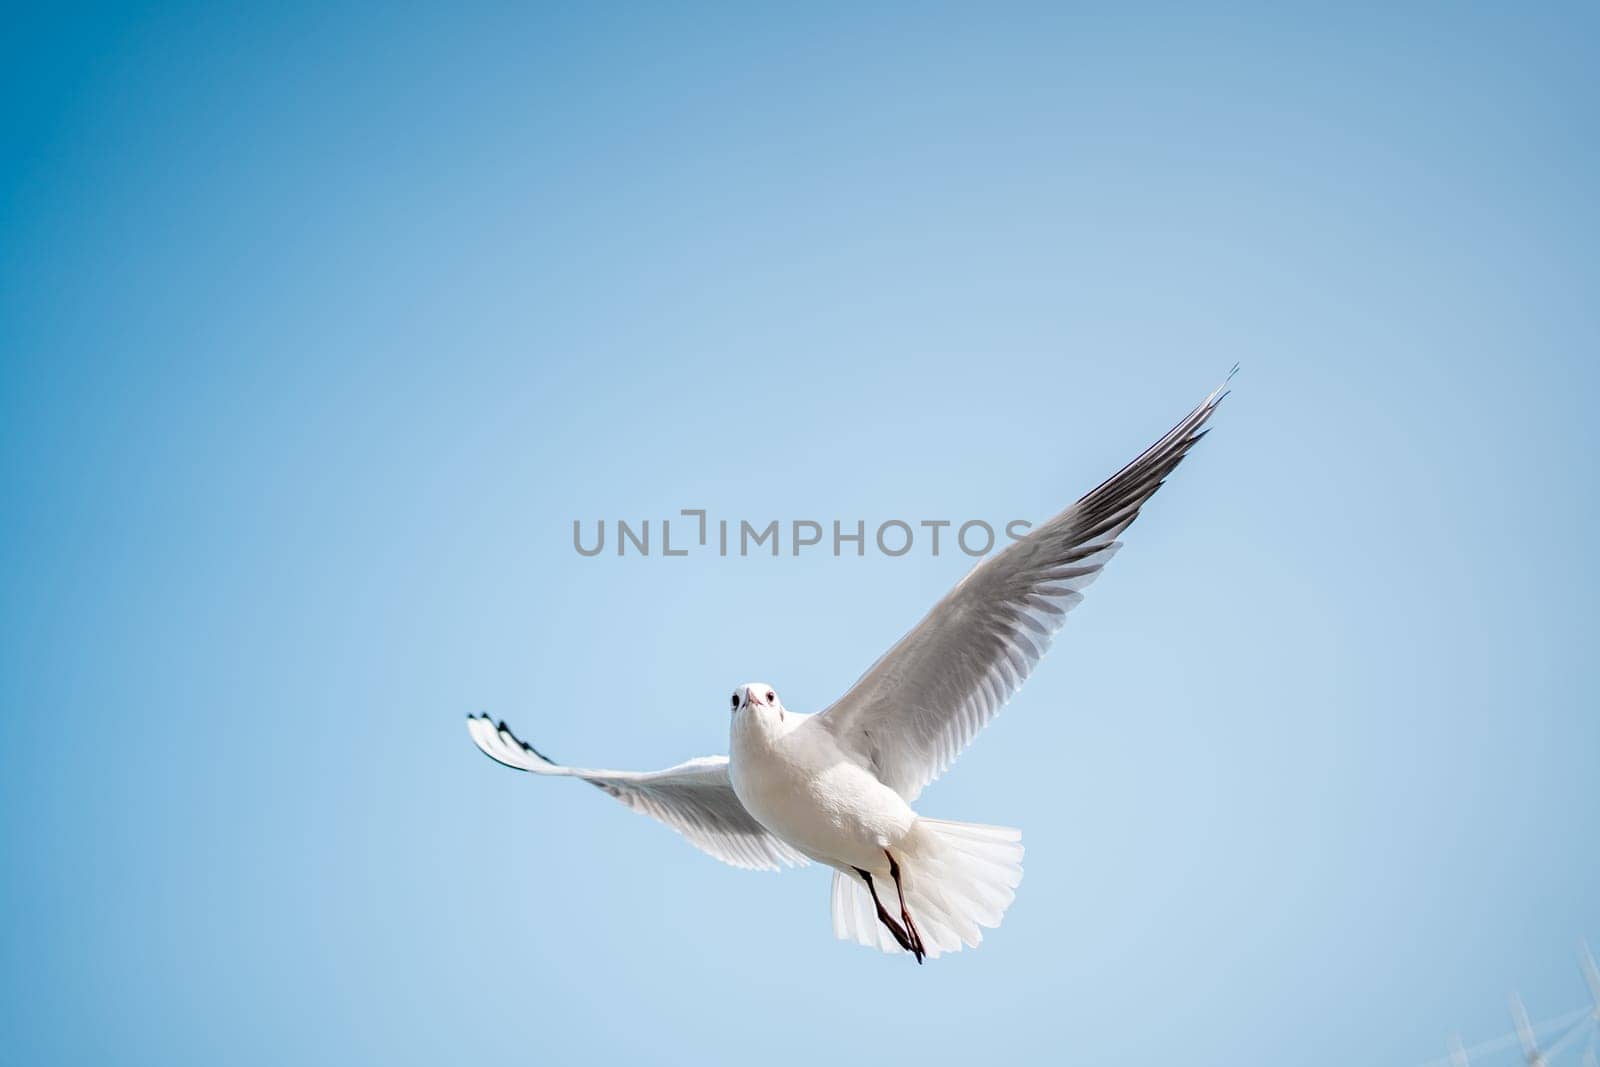 Flying seagull in clear sky. Low angle view of seagull flying against clear sky during sunny day. Clearly show full body, white feather texture and black wings tip. Alone seagull flies in clear sky